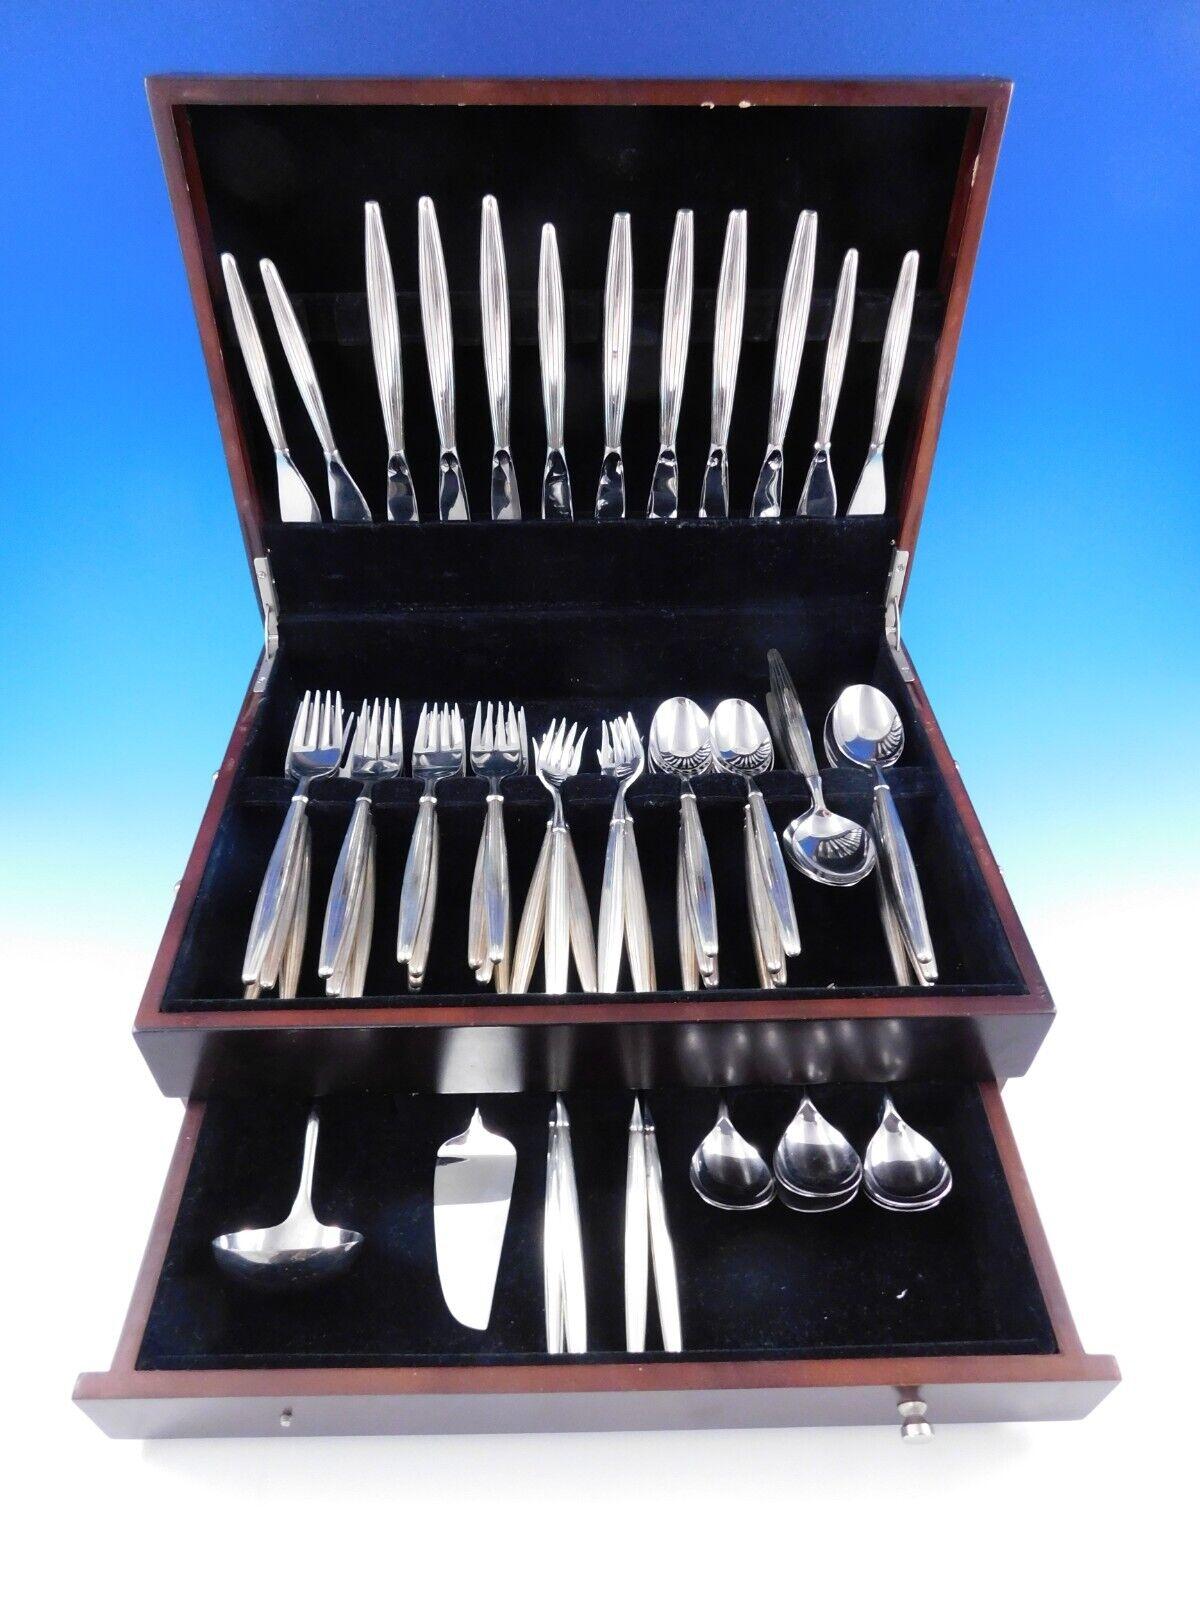 Lines by Contempra House - Division of Towle Mid-Century Modern Sterling Silver Flatware set - 66 pieces total. All pieces have hollow handles with stainless implements. This set includes:

8 Knives, 7 - 9